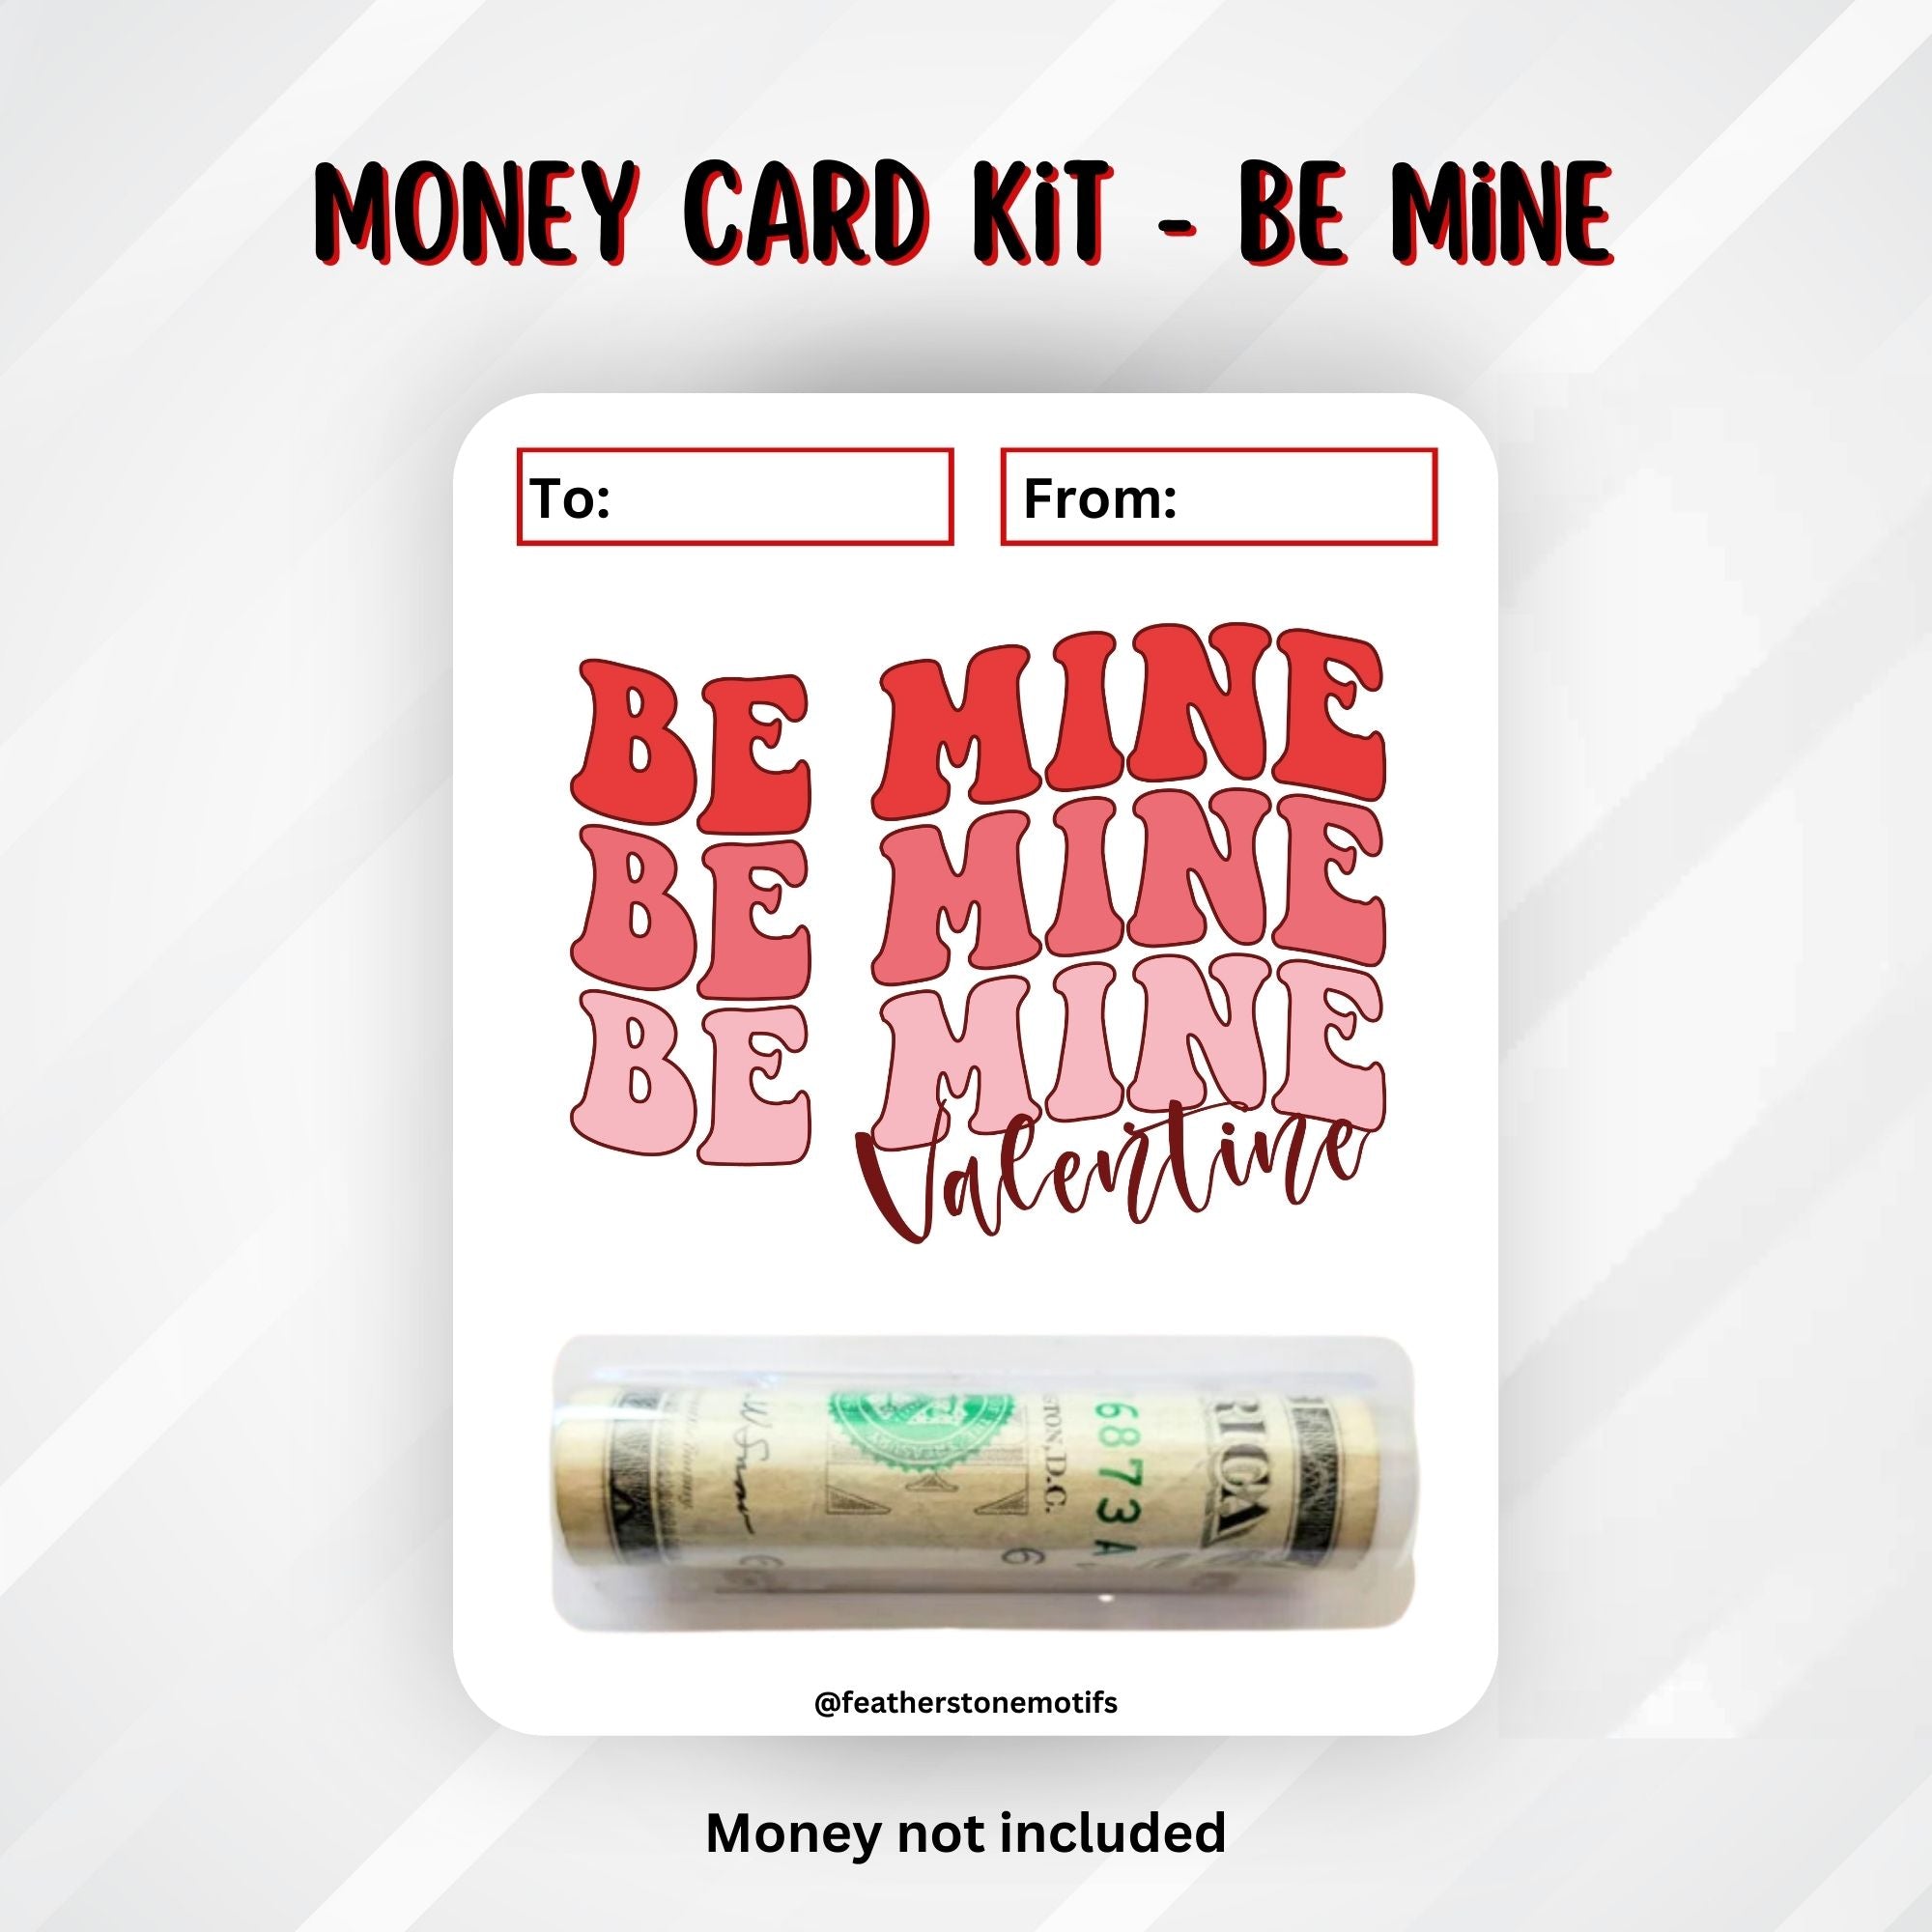 This image shows the money tube attached to the Be Mine Valentine Money Card.